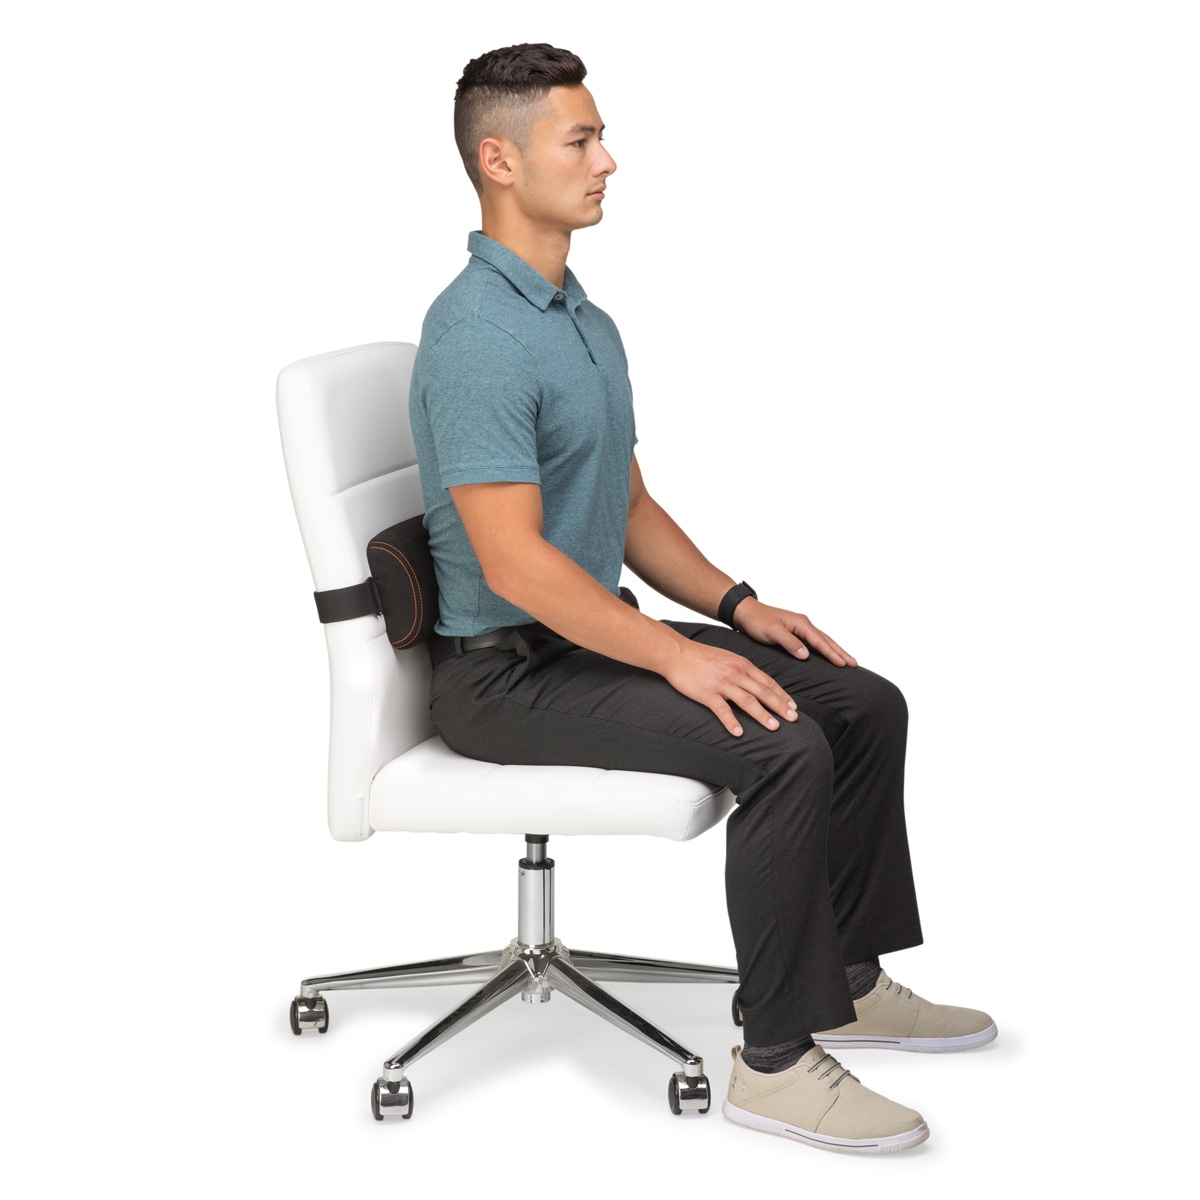 Slimrest Deluxe Lumbar Support  Help Protect & Maintain Proper Spinal